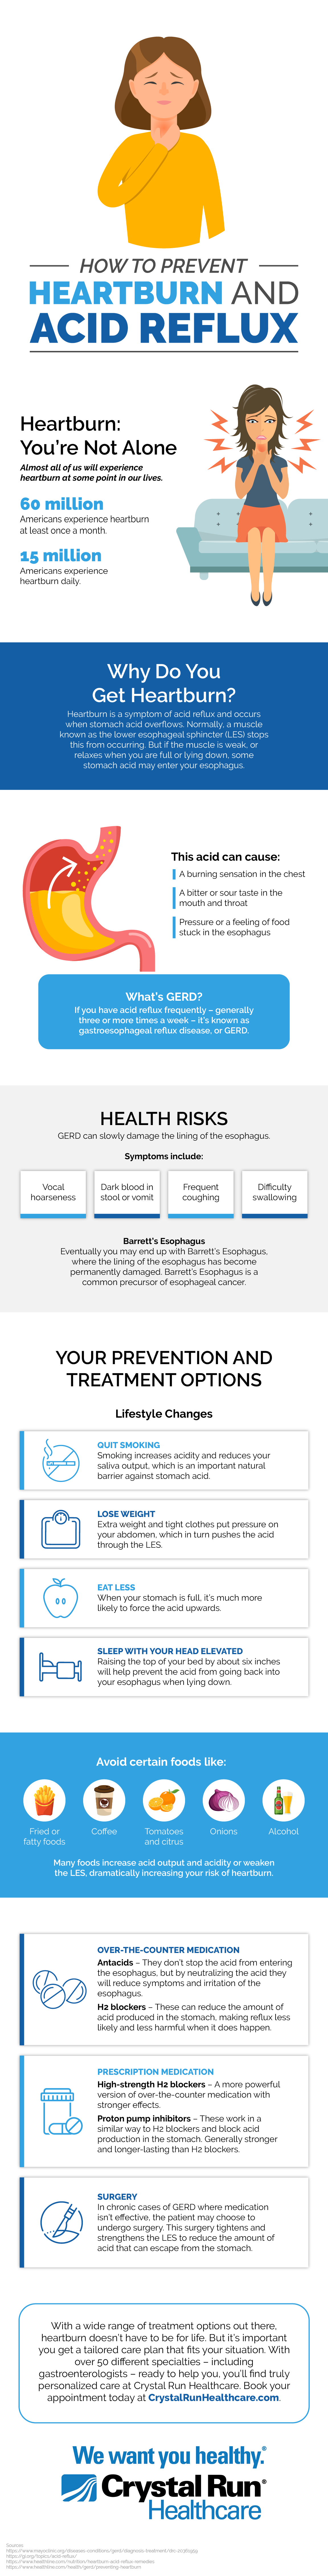 Preventing Heartburn and Acid Reflux Infographic